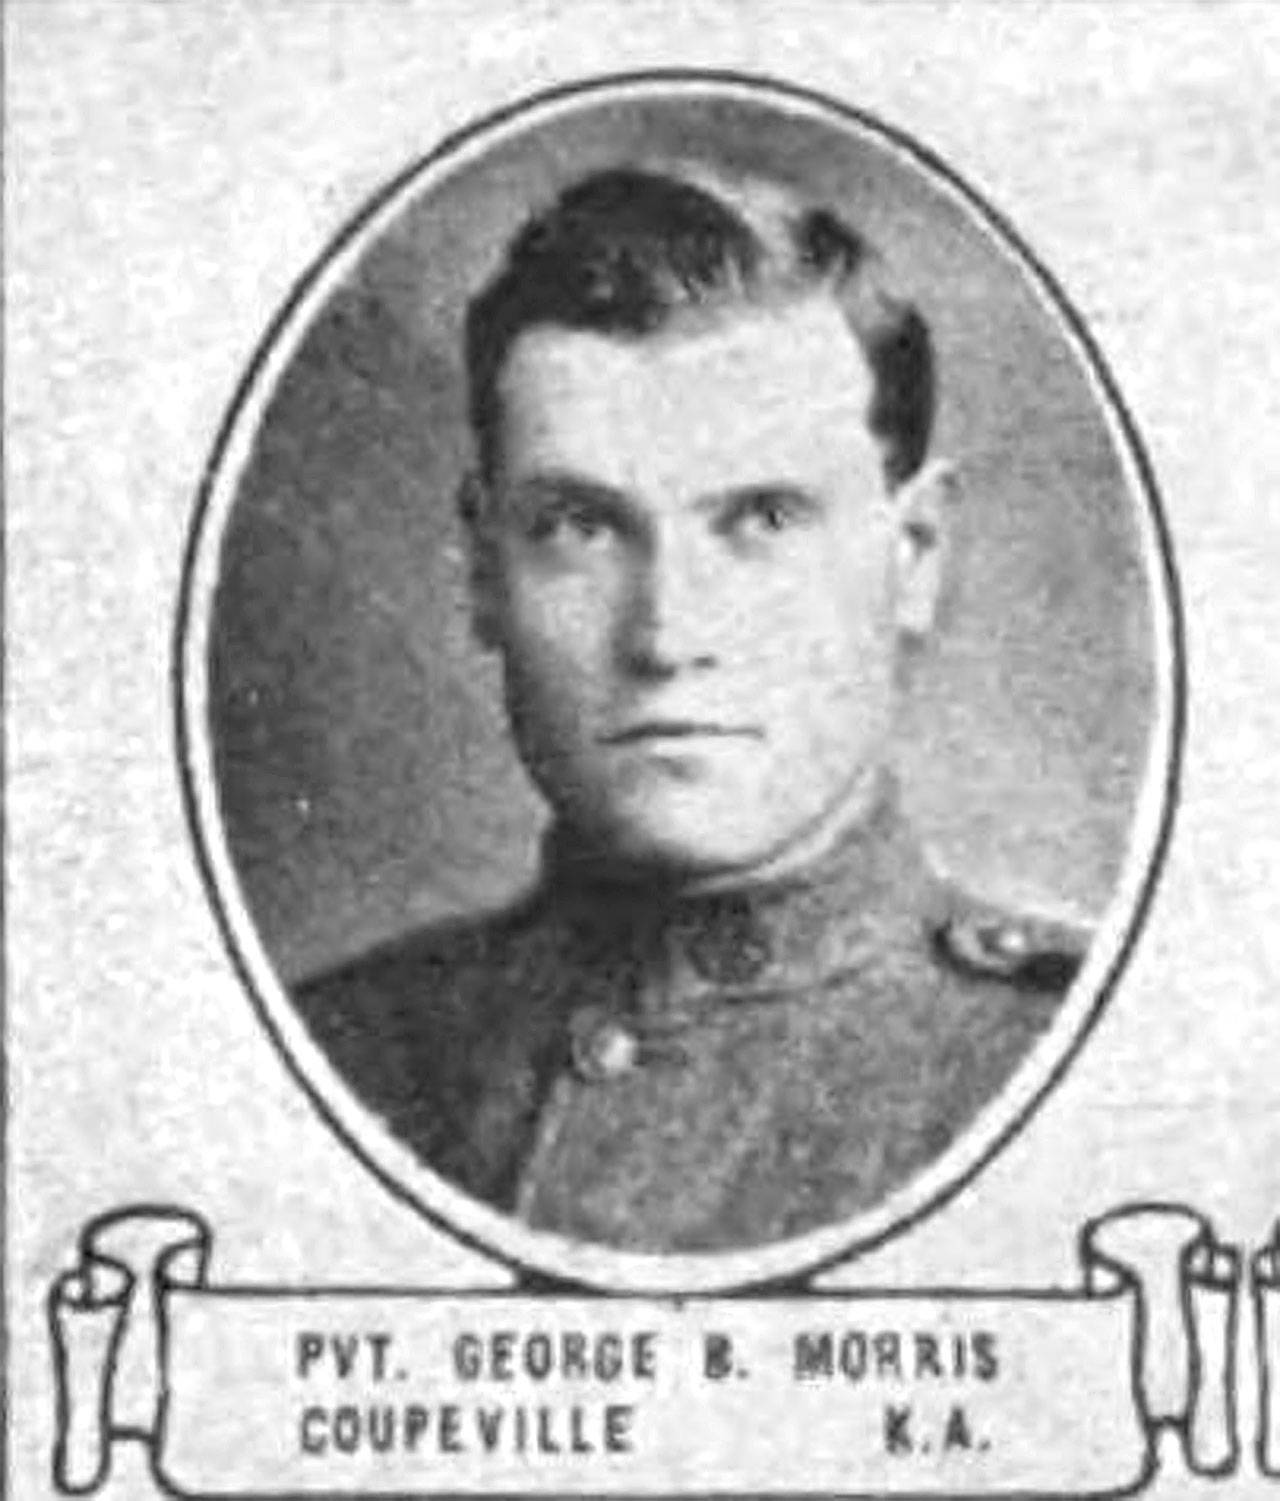 George Morris of Coupeville served in the Army in WWI. Photo courtesy of Candace Nourse-Hatch